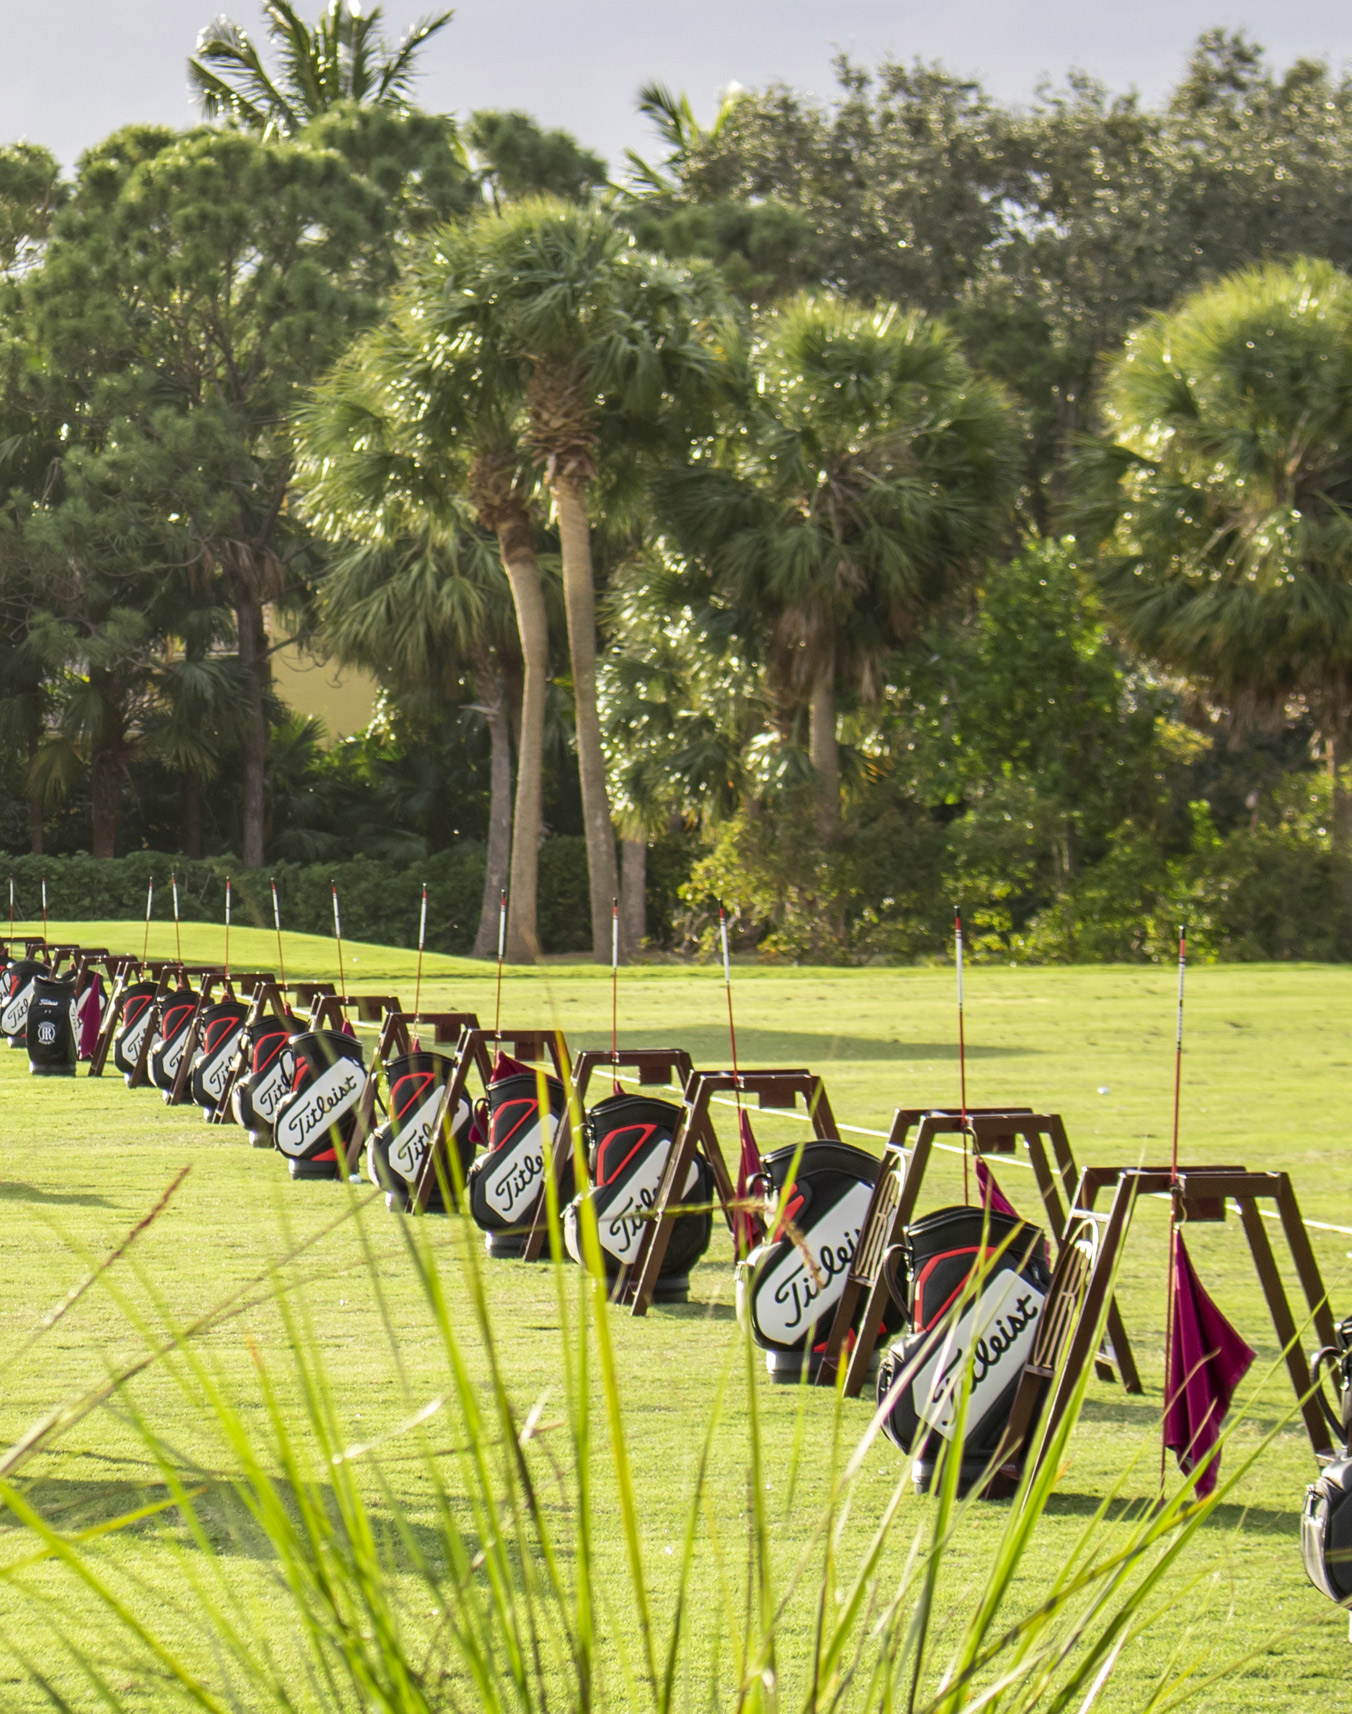 Golf bags lined up at Addison Reserve in Florida